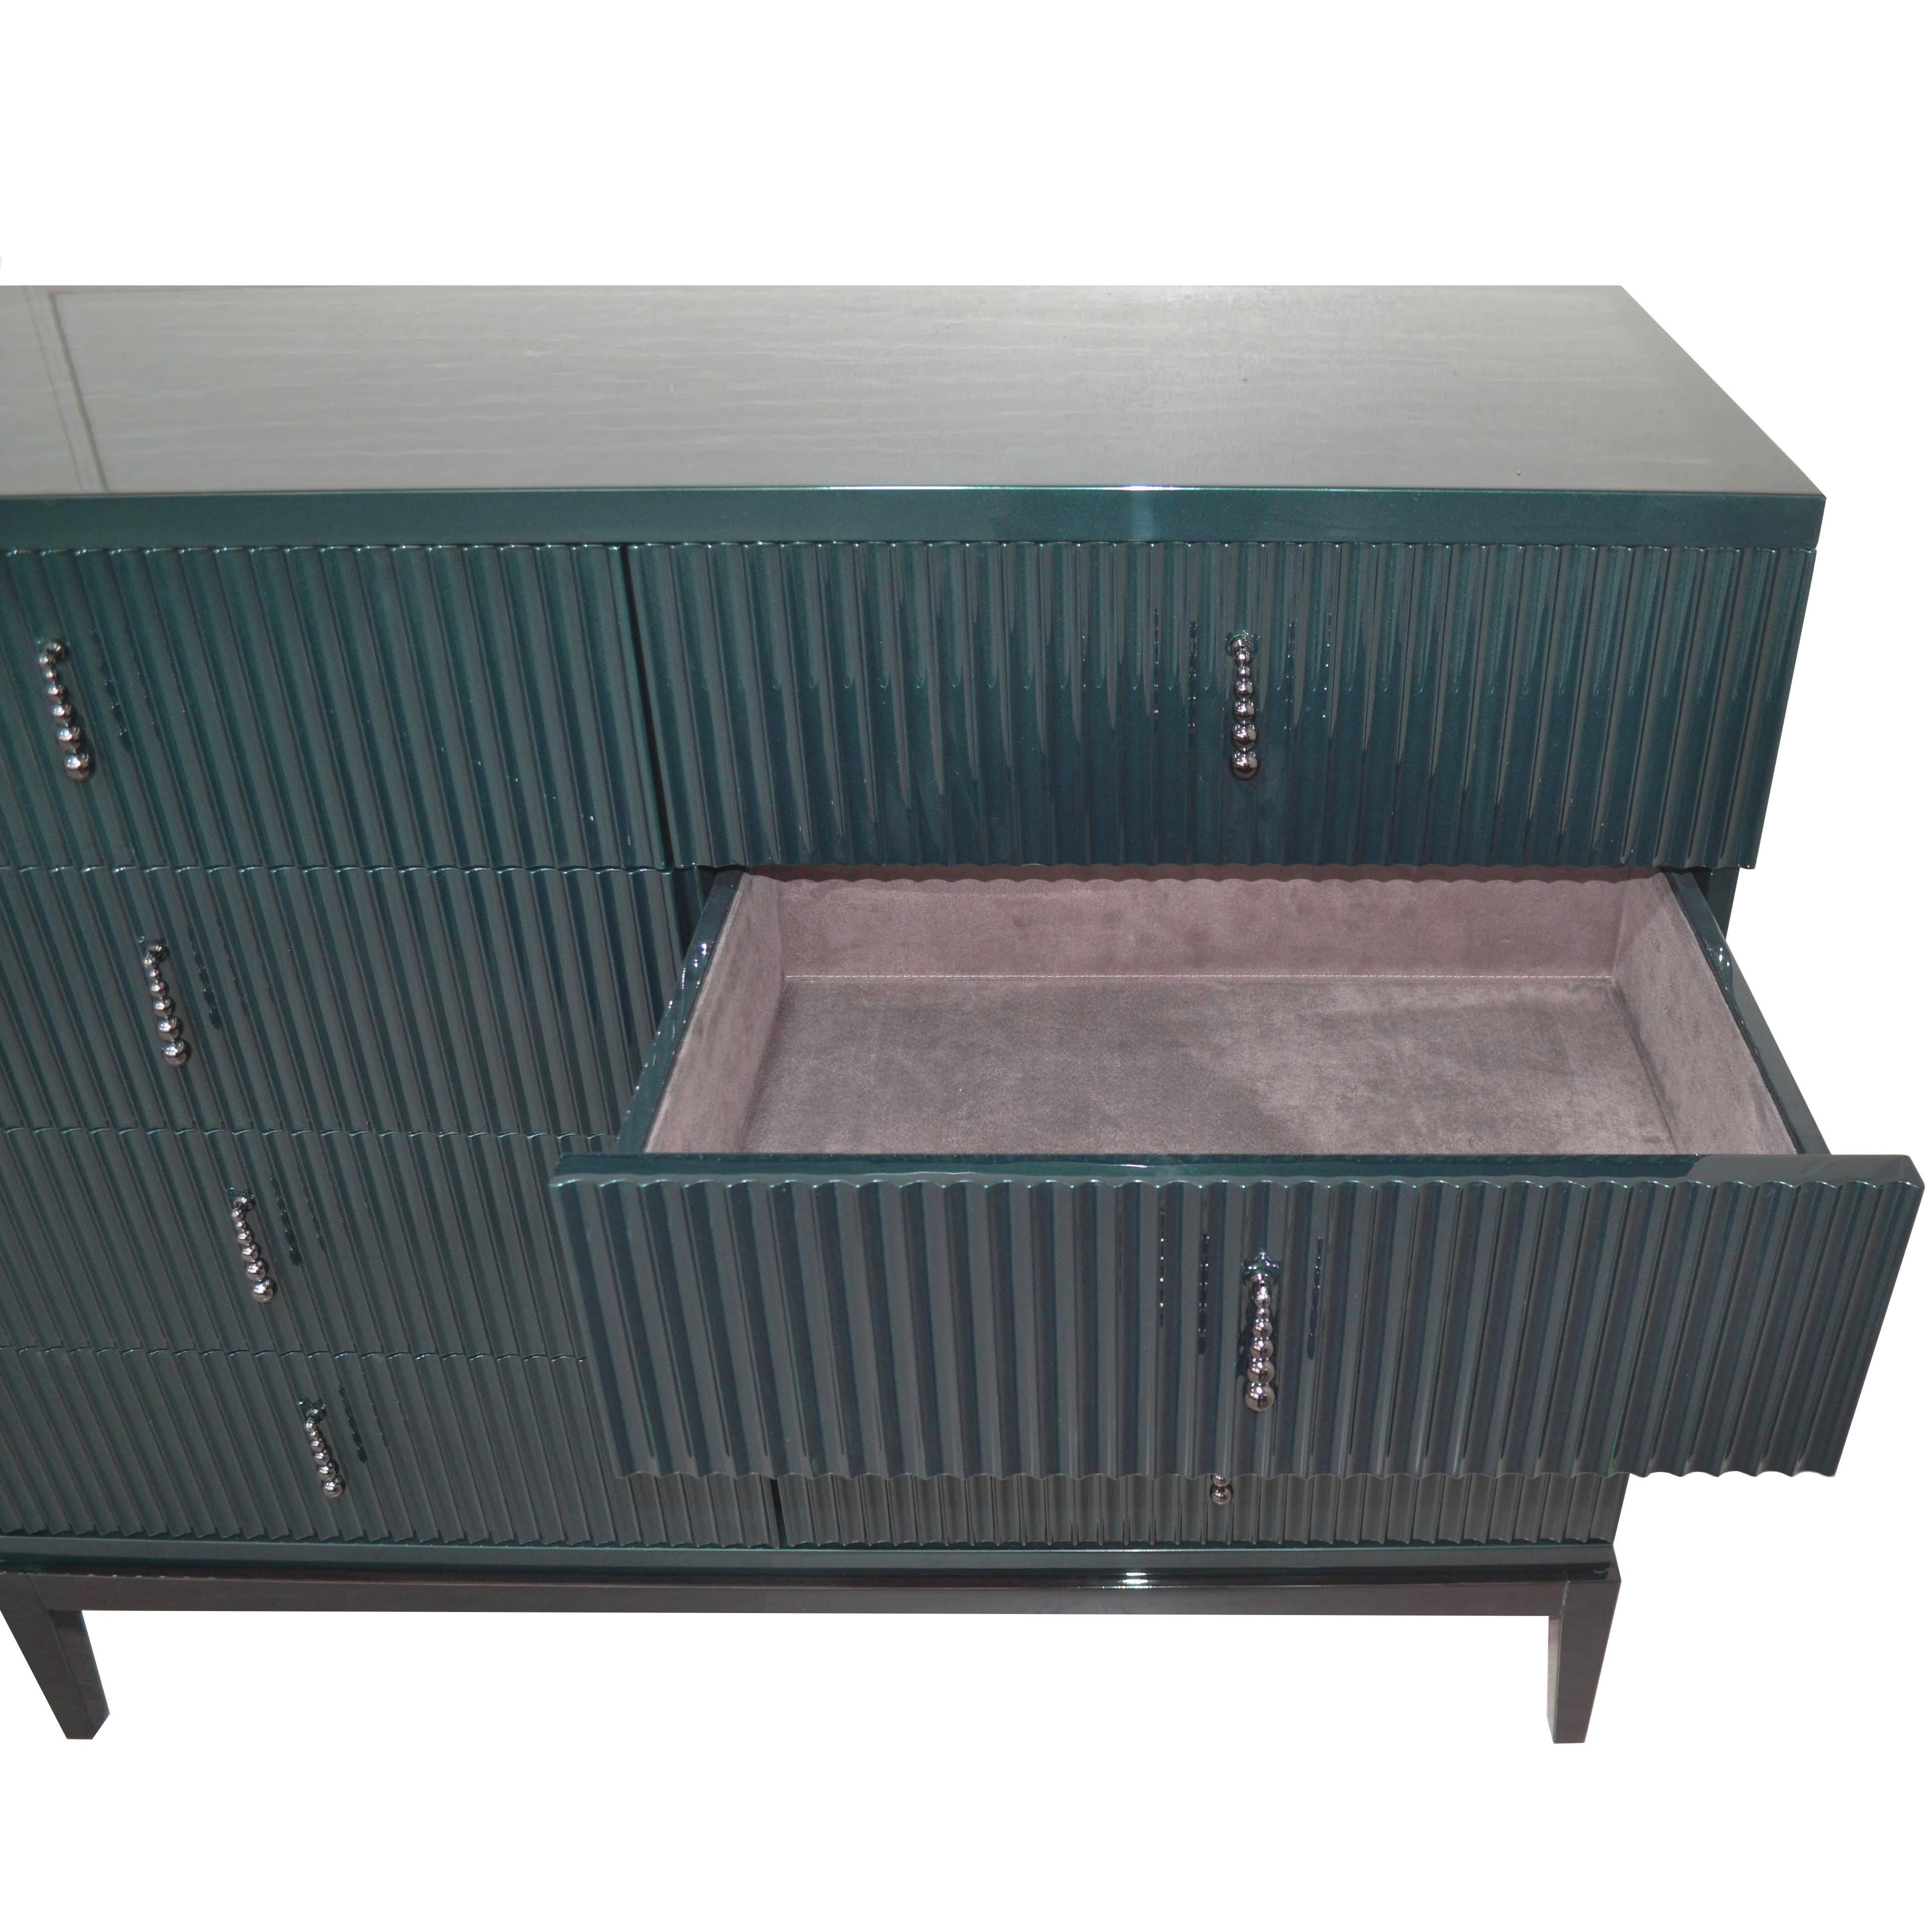 Modern Italian Dresser in Glossy Green Smarald Lacquered Wood with Upholstered Drawers For Sale